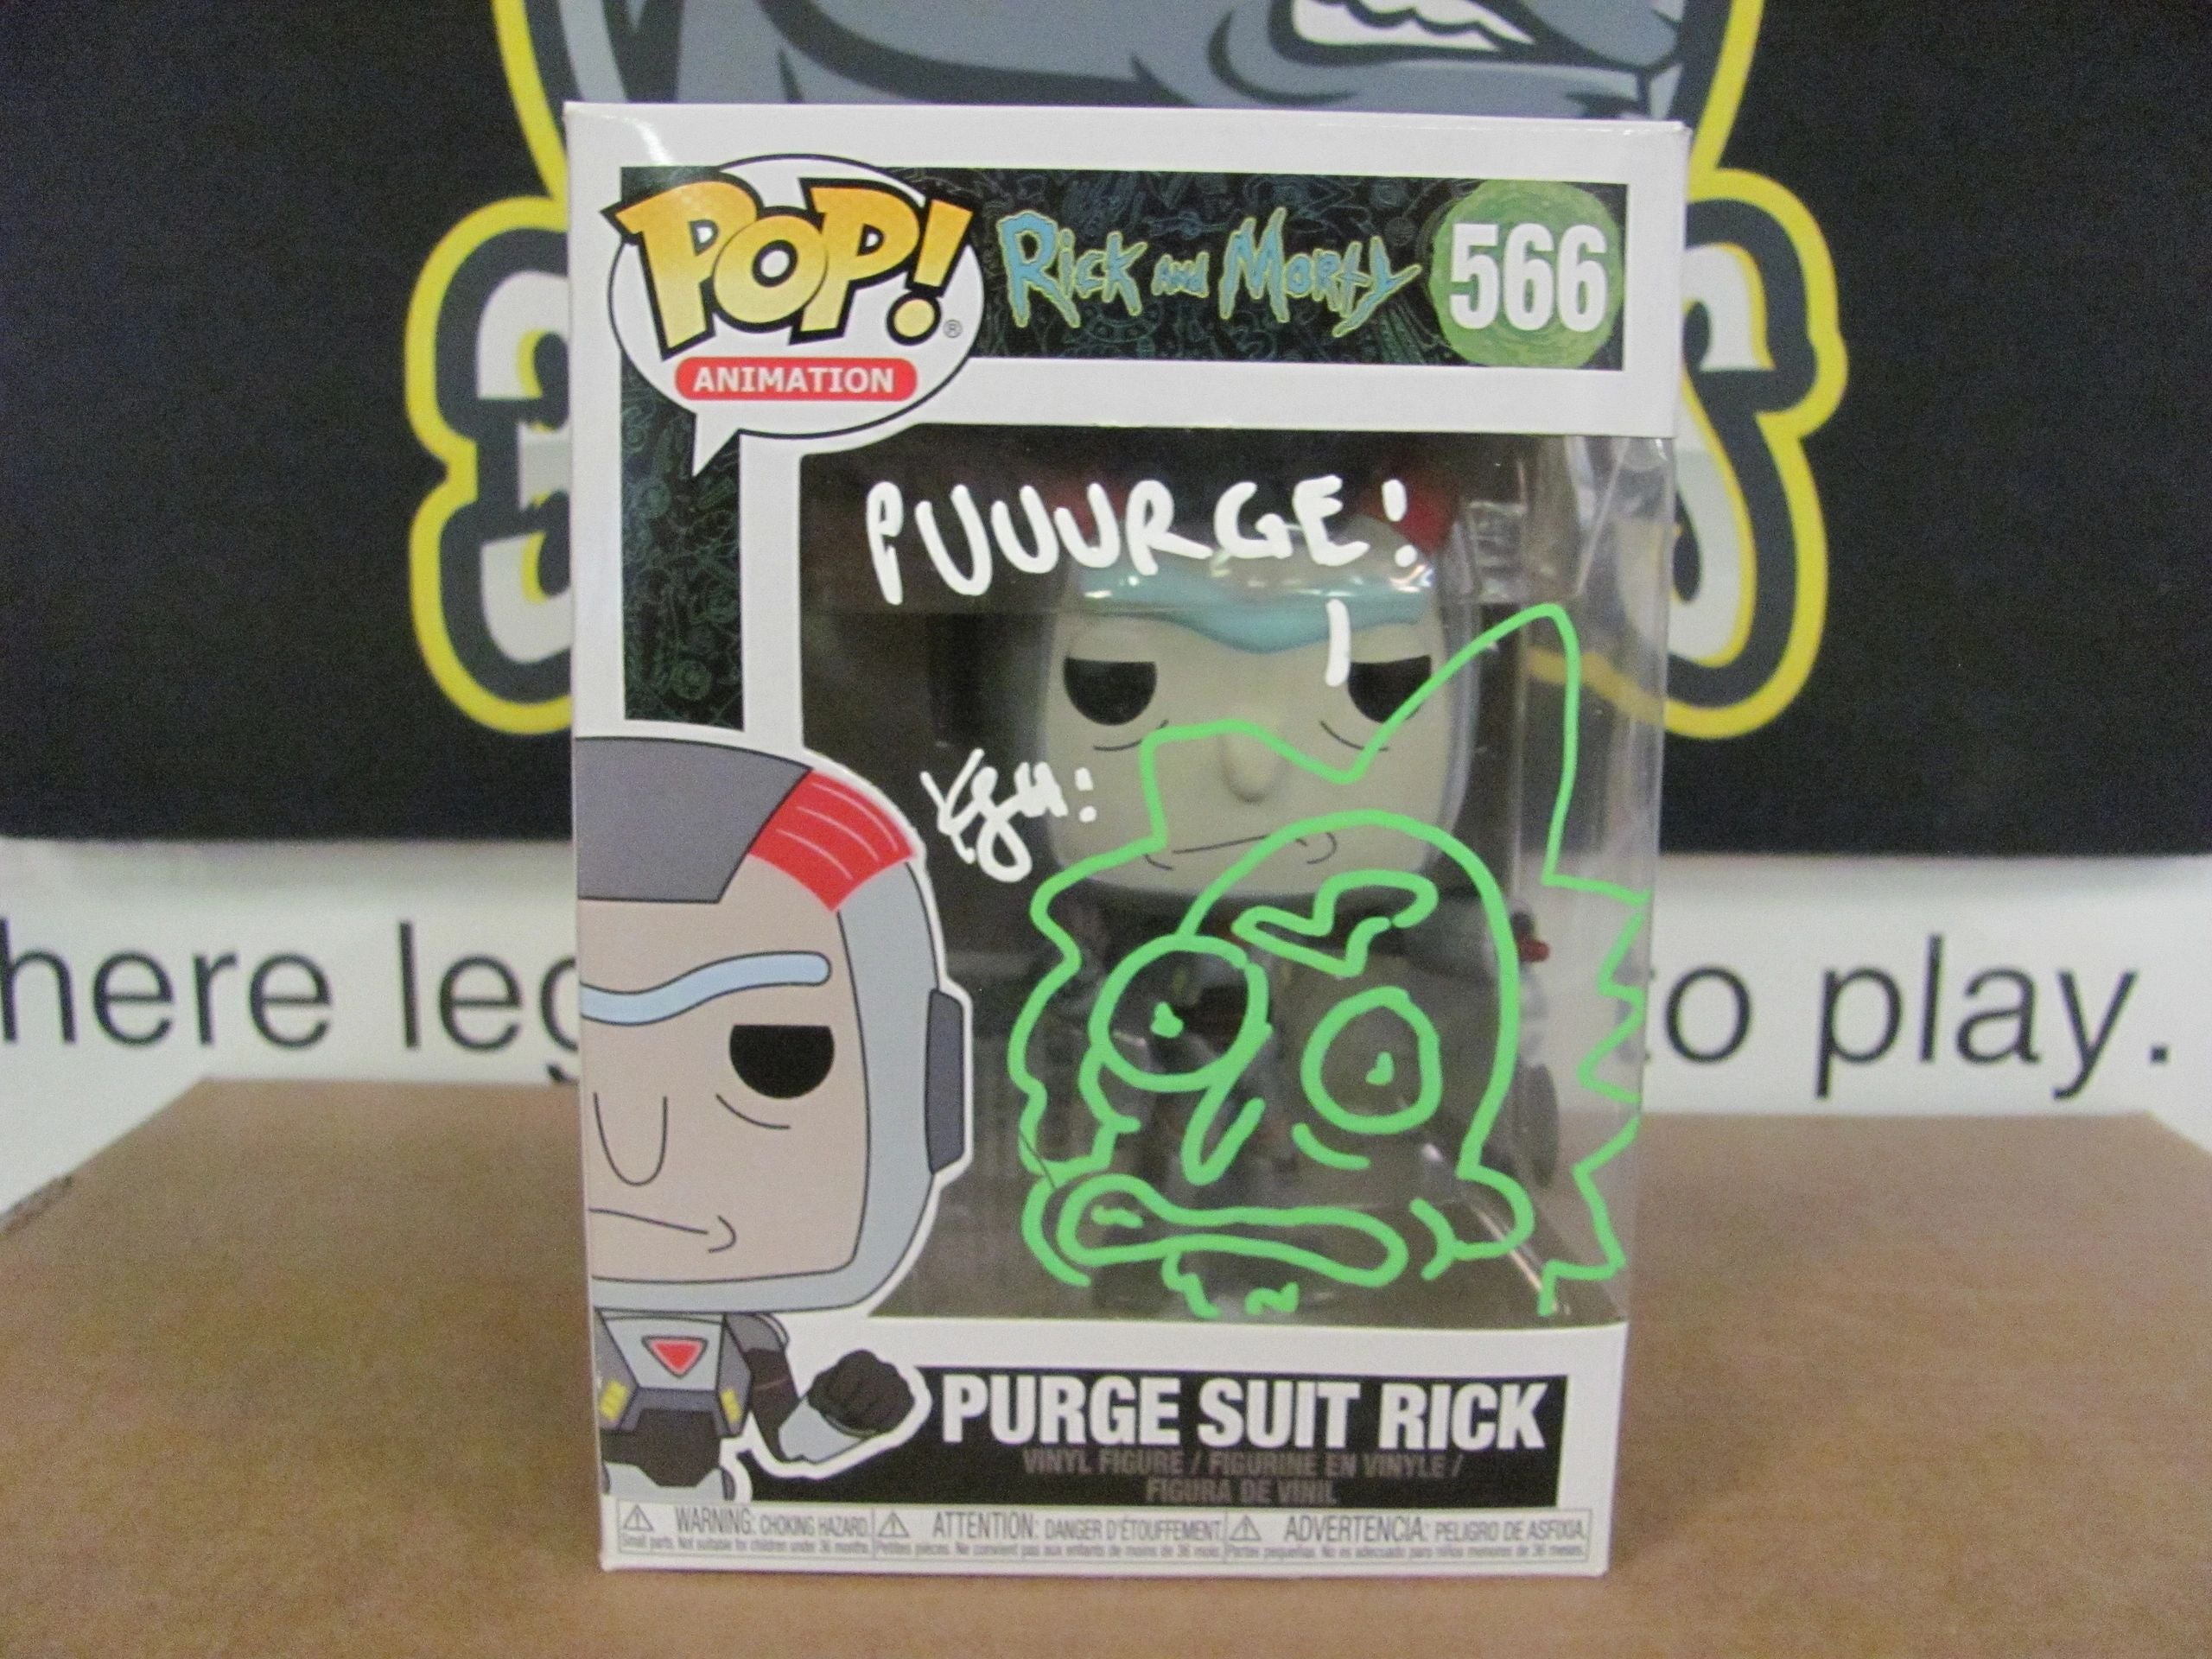 KYLE STARKS Signed and Inscribed Funko POP! Animation Rick and Morty #566 Purge Suit Rick Vinyl New In Box W/Beckett COA